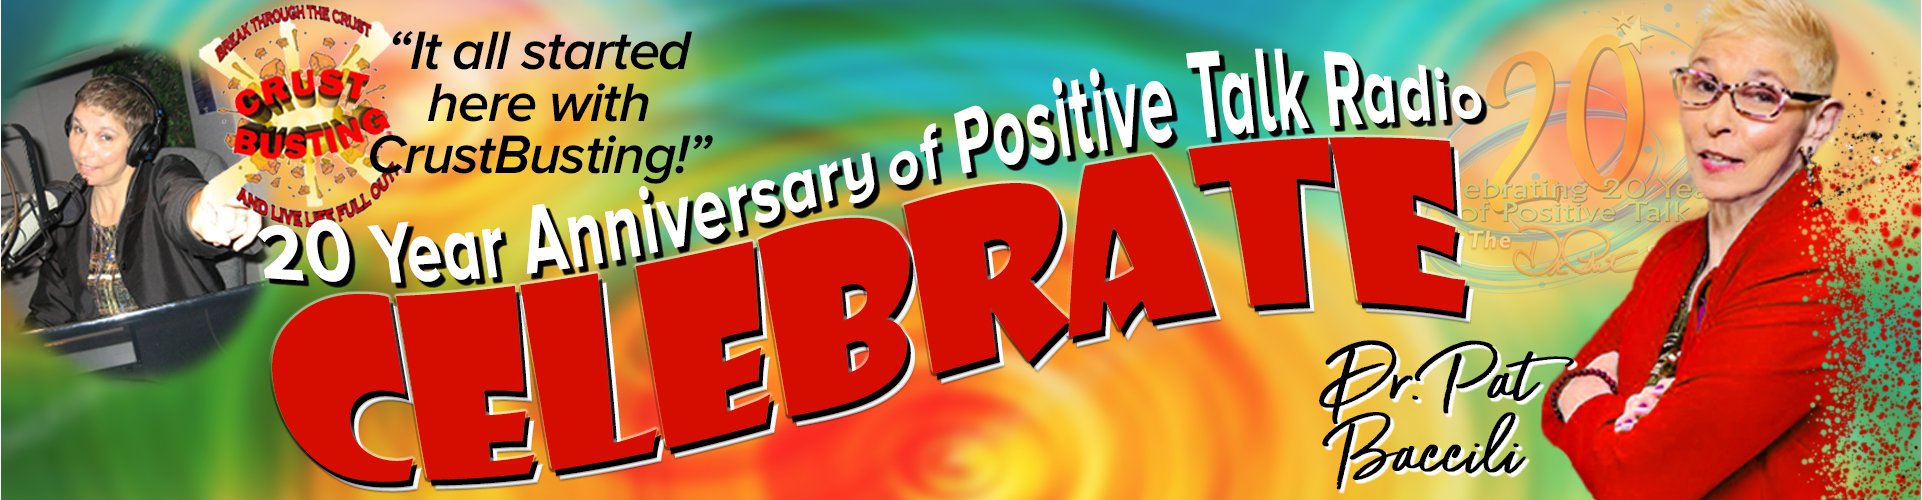 20 Year Anniversary Celebration of Positive Talk Radio with Dr. Pat Baccili